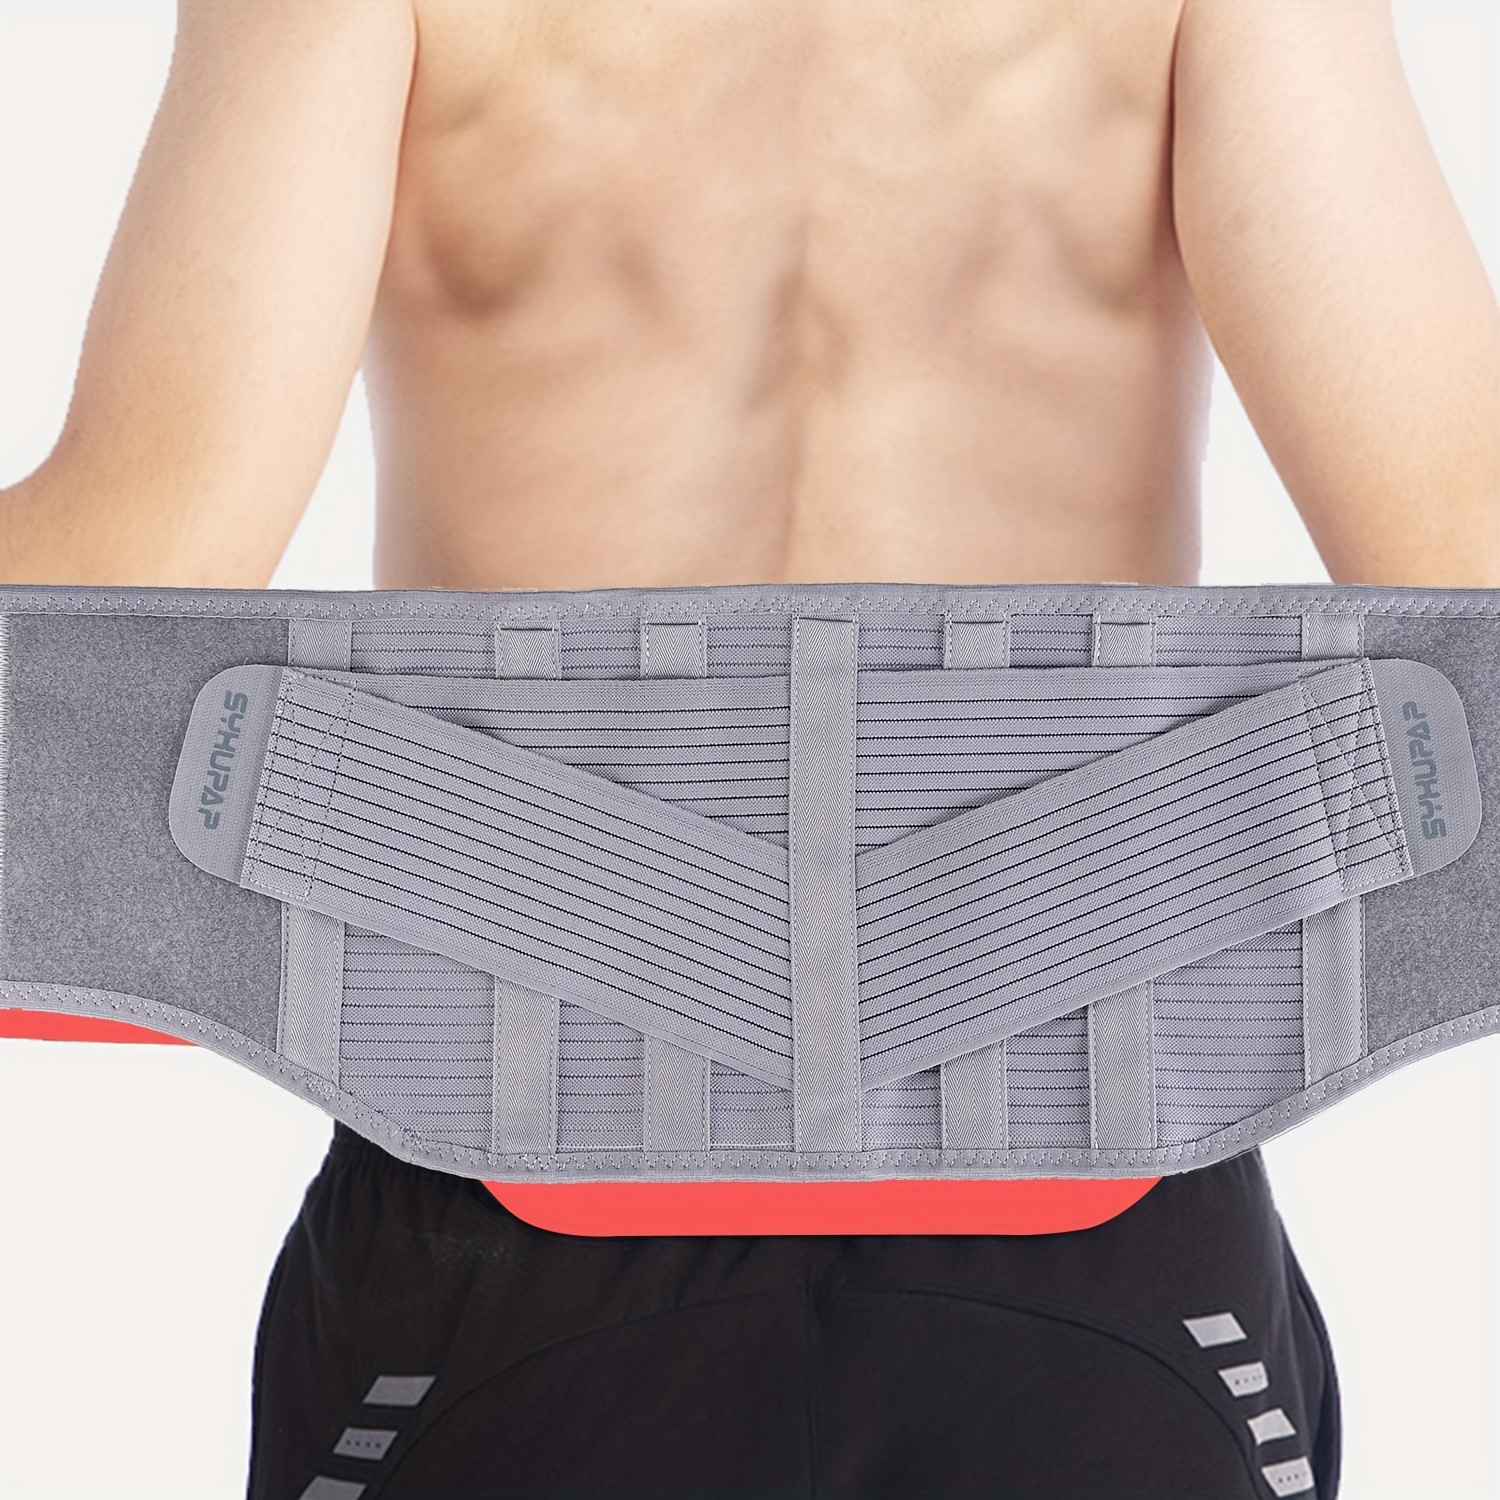 Pellitory Lumbar Spine Pain relief Back Support Belt Therapy Upper